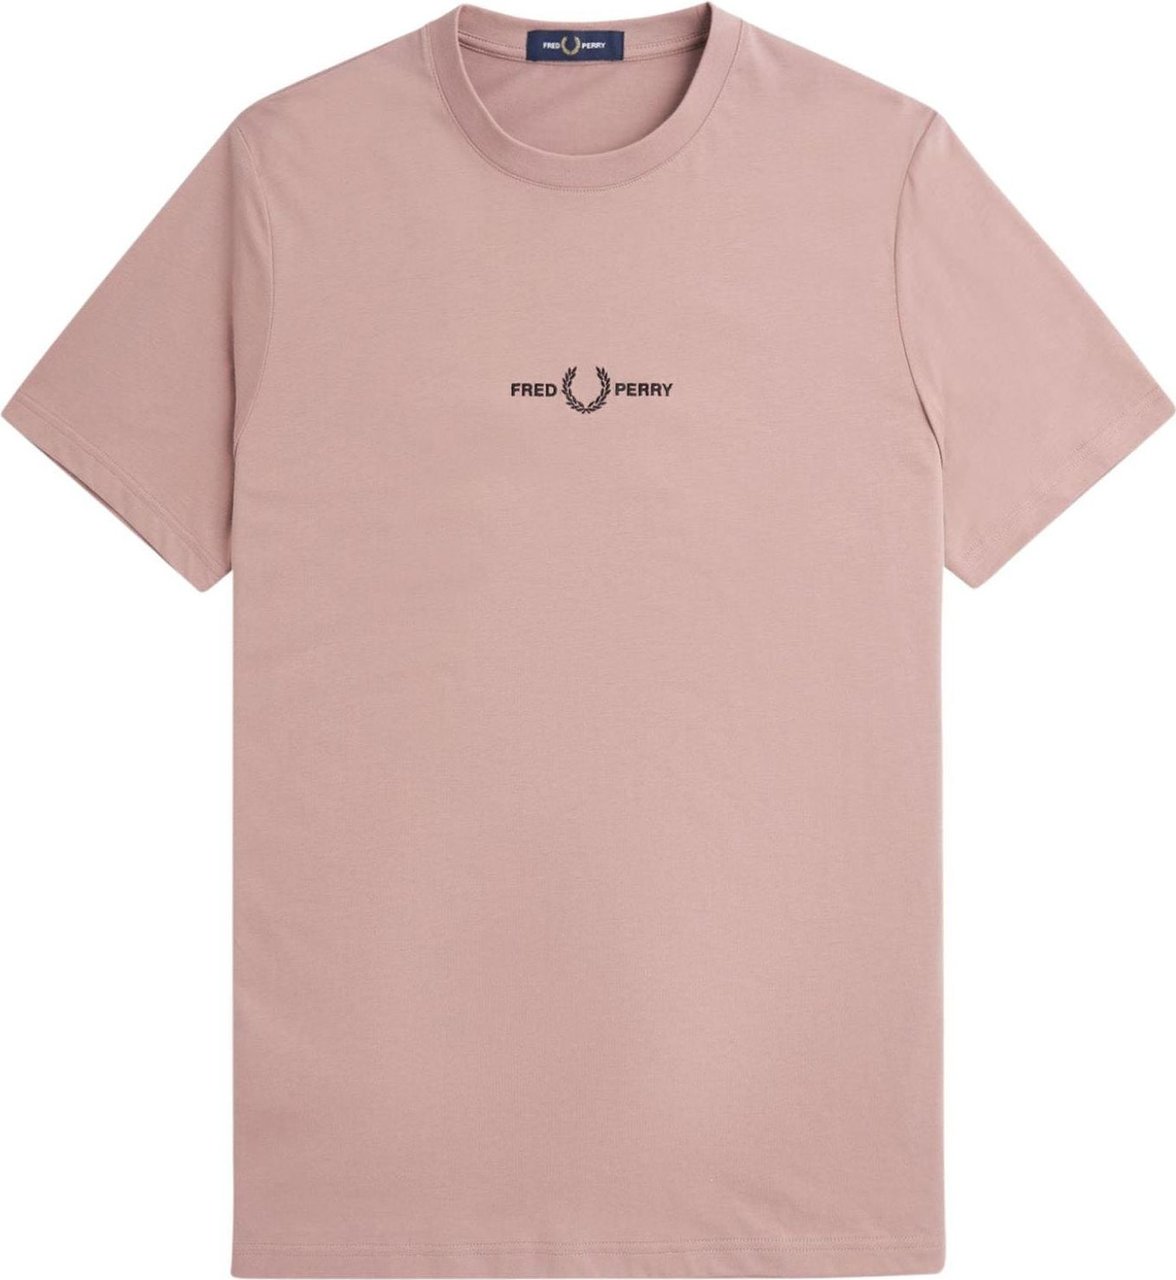 Fred Perry T-shirt Uomo ricamo frontale Roze